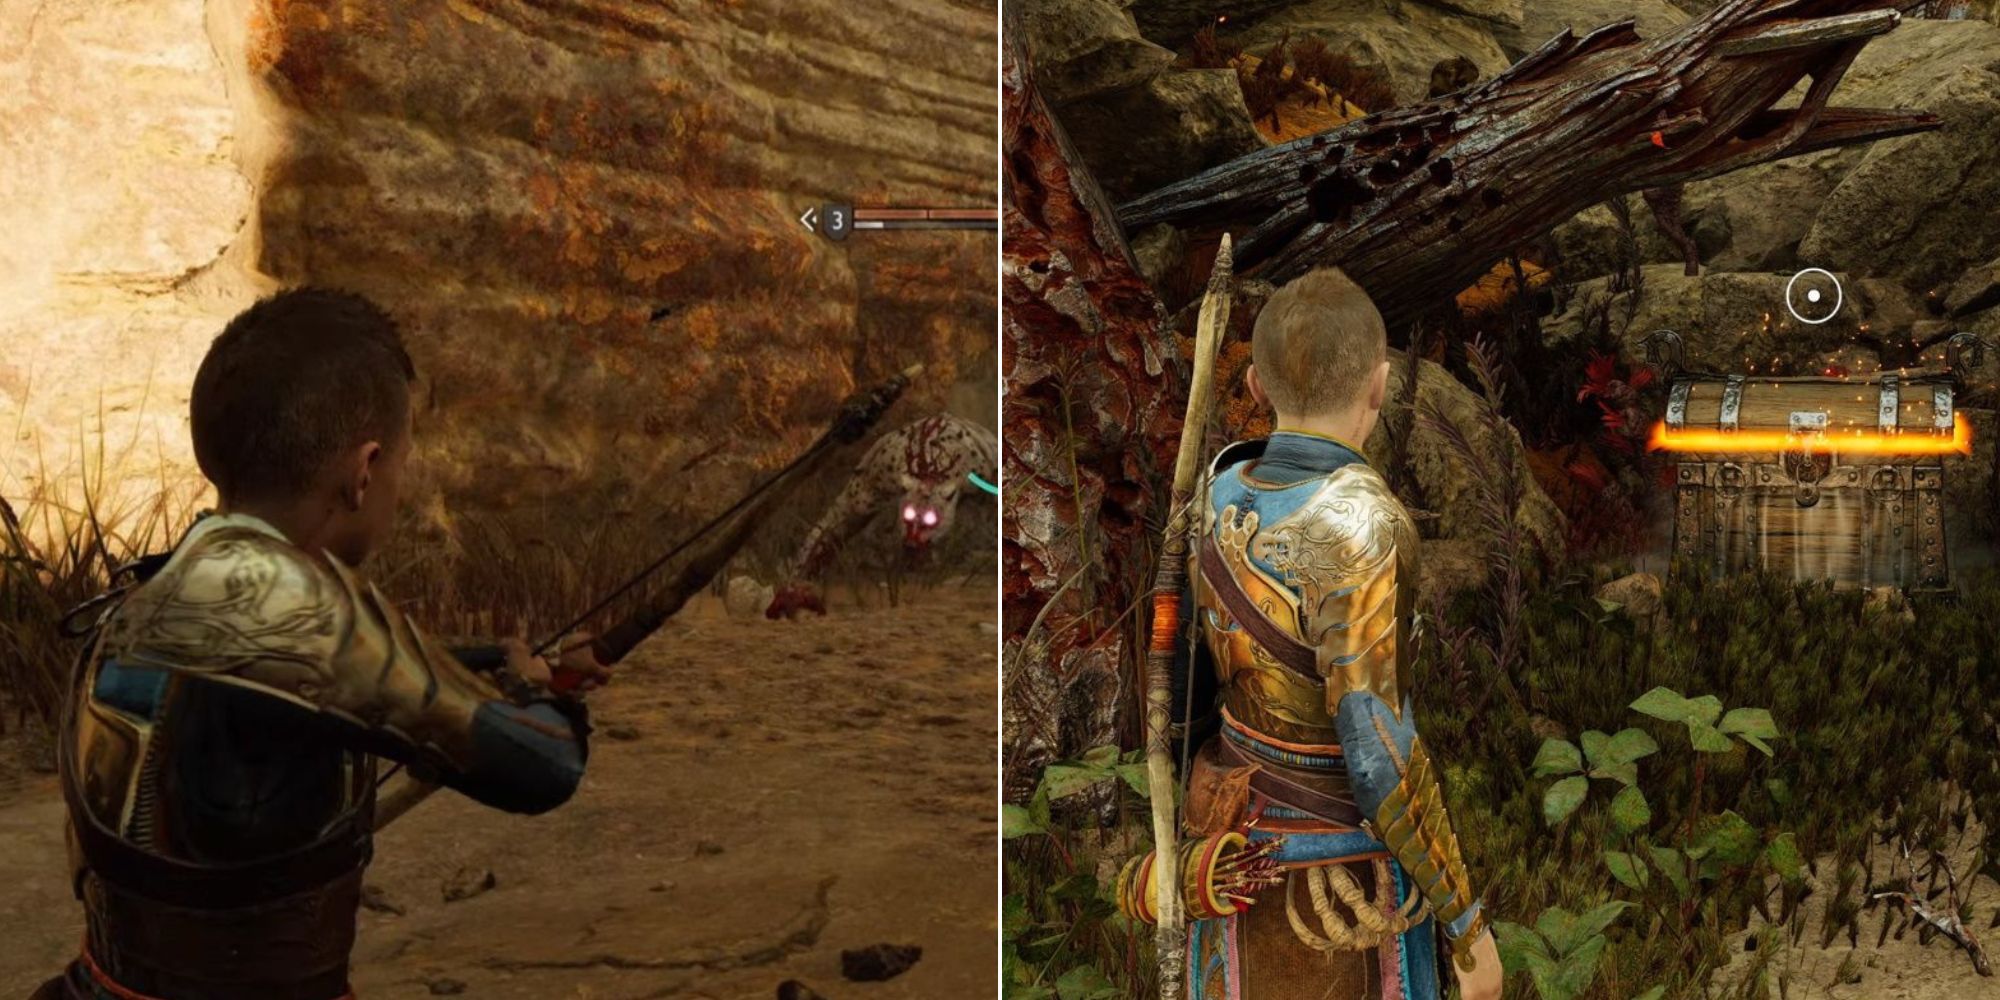 Split image with two photos. The left is Atreus starting to aim his bow at an enemy slightly off screen. The right photo is Atreus looking at an unopened Hacksilver loot chest.